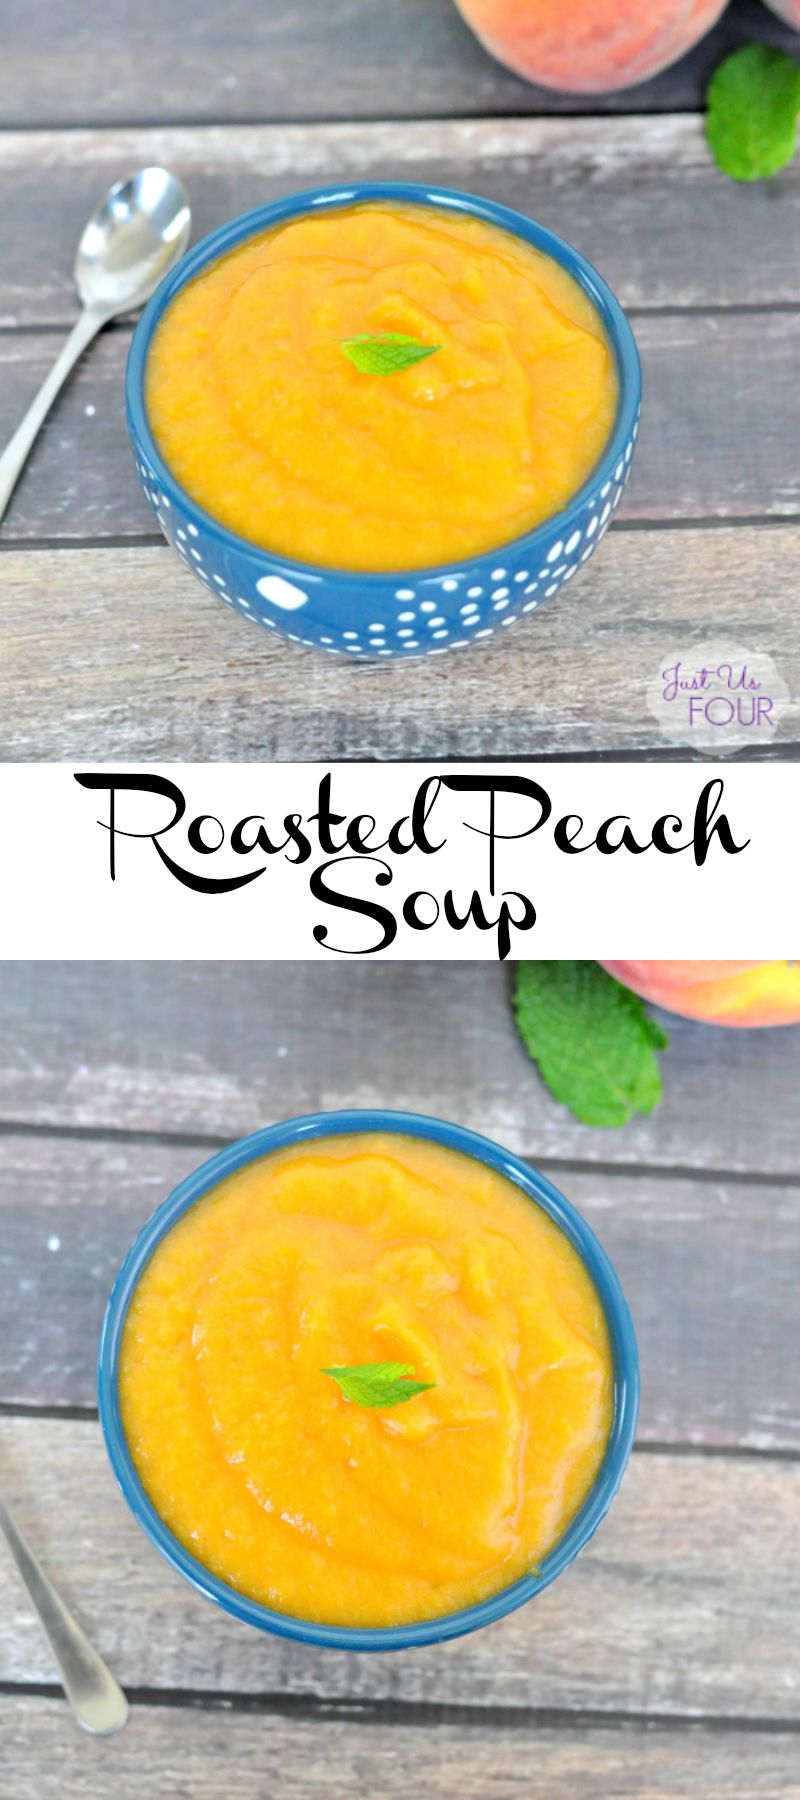 Roasted peach soup makes the absolute perfect summer recipe!